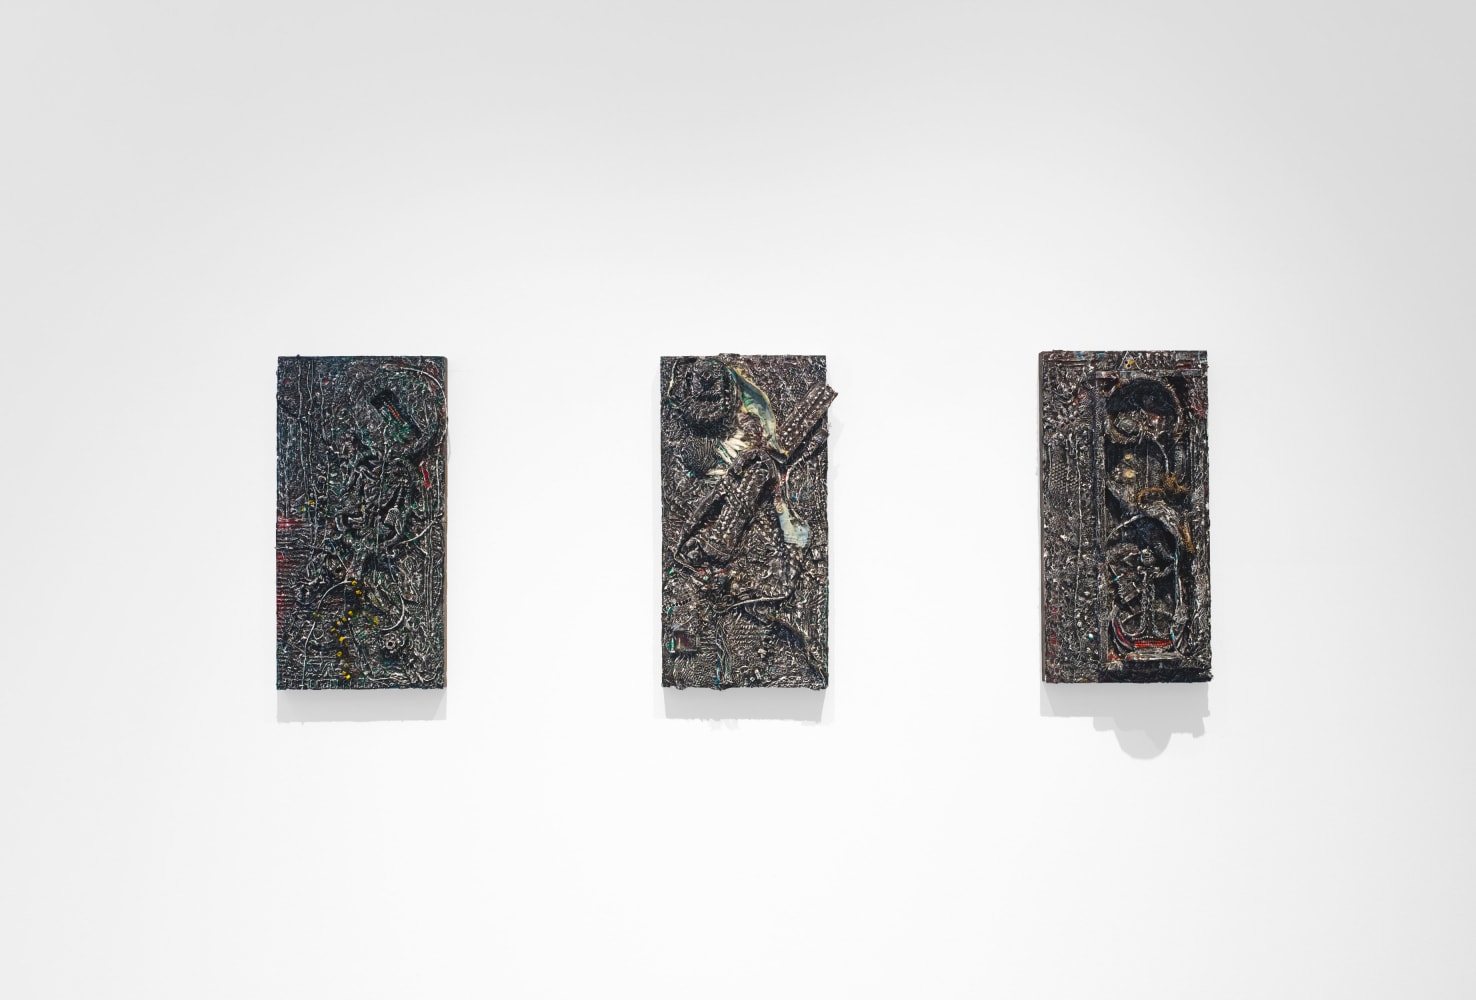 Three small, textured, and dark artworks of the same size hang on gallery wall.